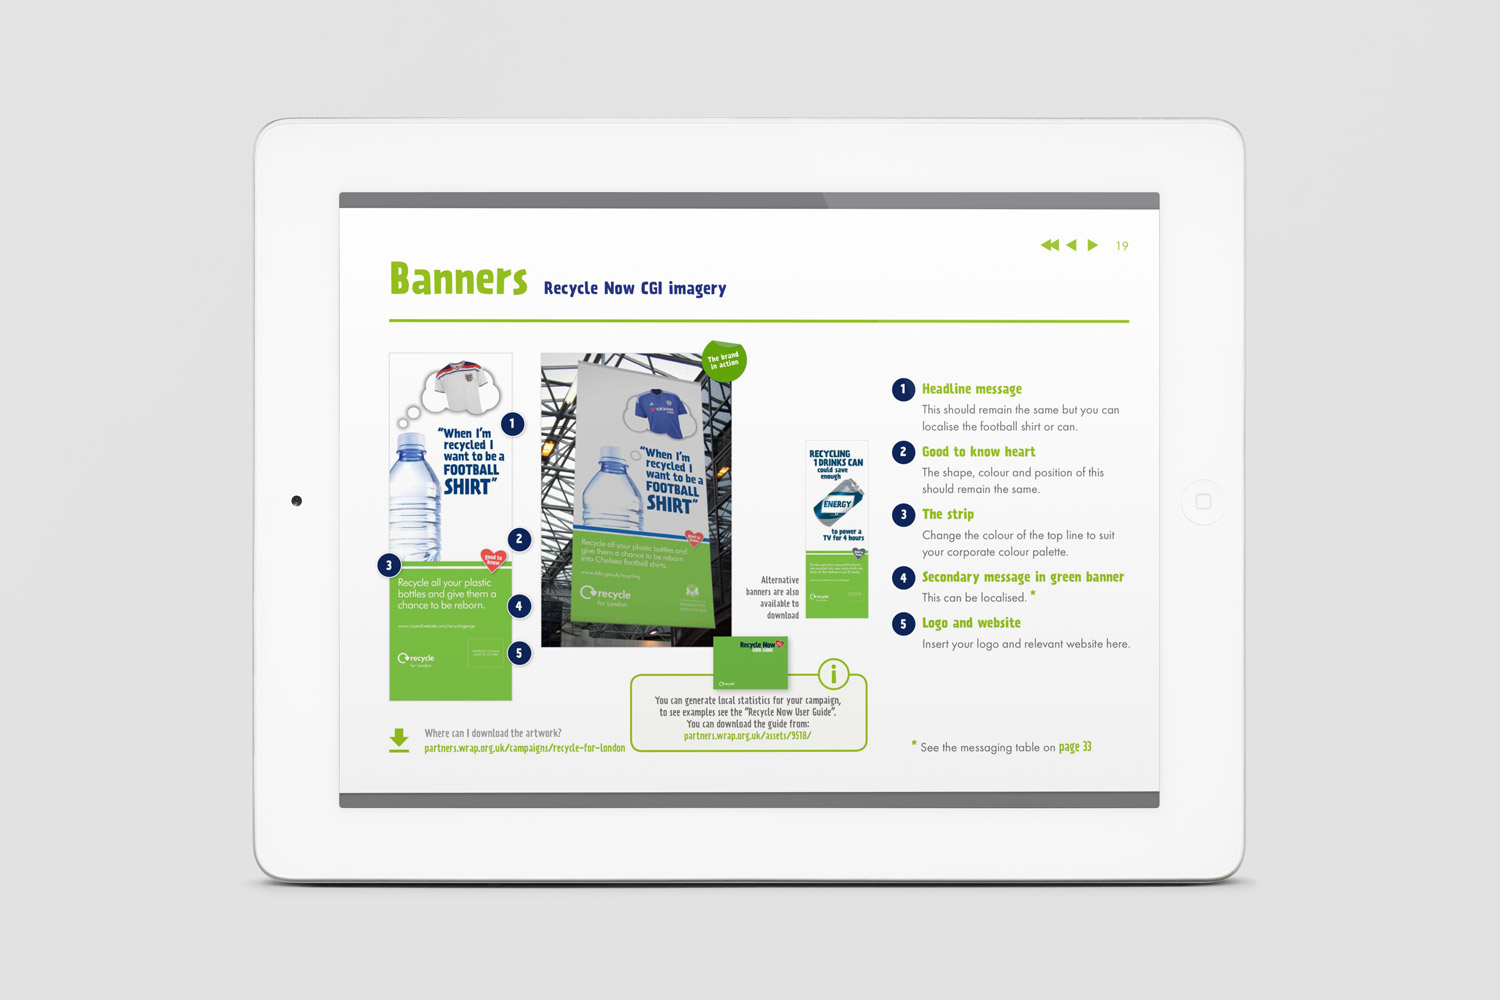 Recycle-for-London-Brand-Guidelines-display-banner-iPad-leaflet-by-Get-it-Sorted.jpg